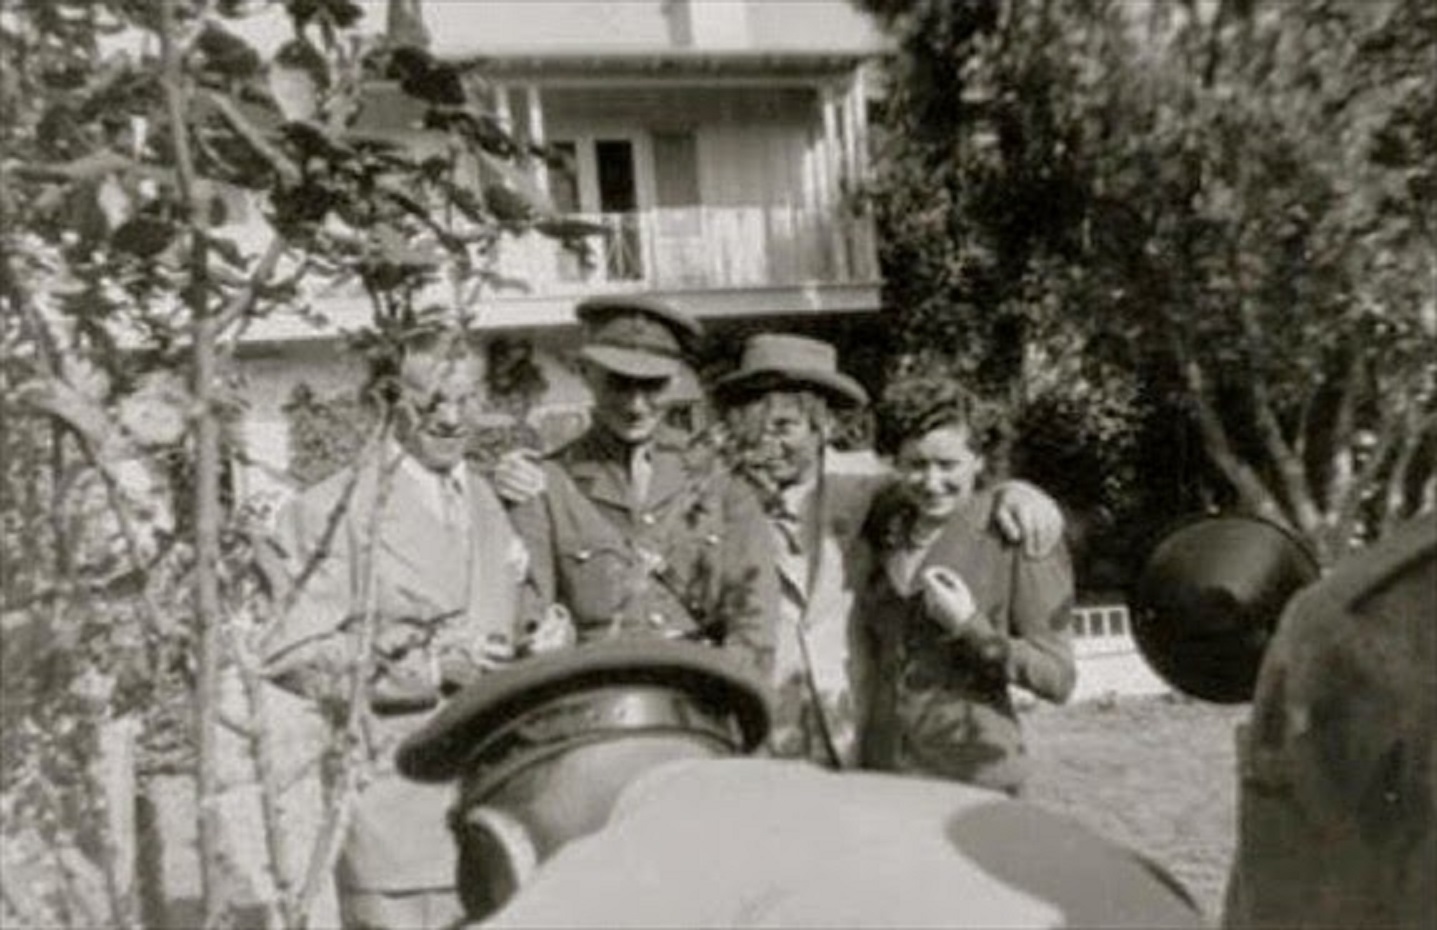 George Burns, Harpo Marx, and Gracie Allen with a fan at their home.